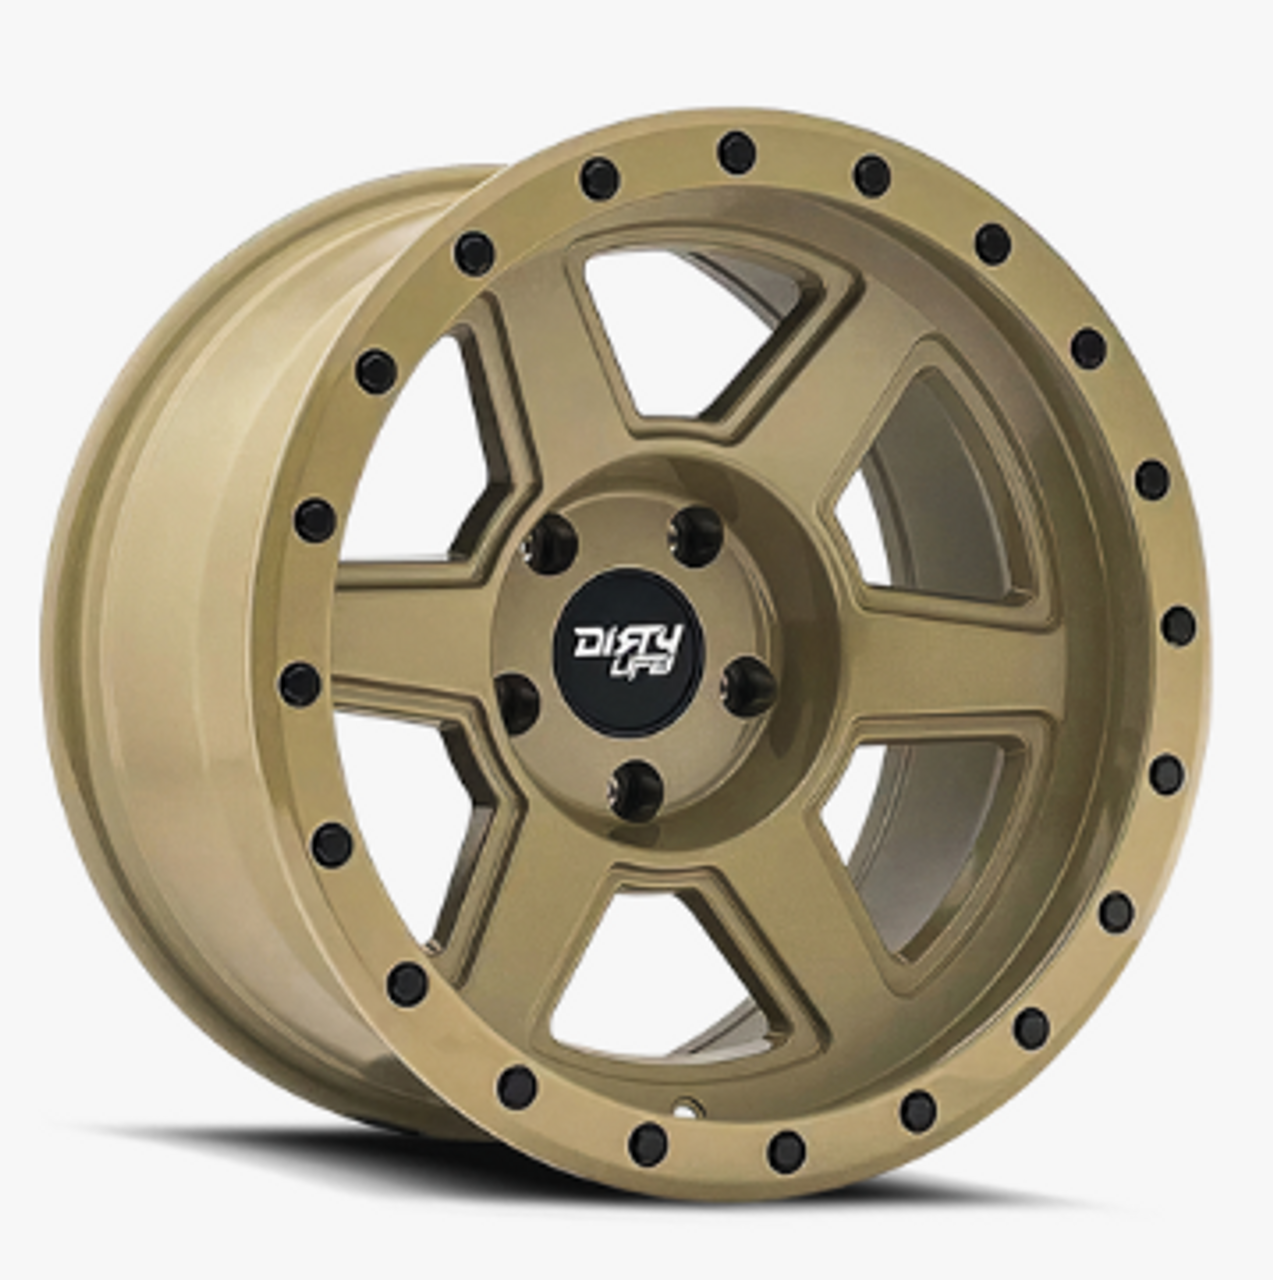 Dirty Life 9315-7973DS12 9315 Compound Wheel 17x9 5x5 in Sand